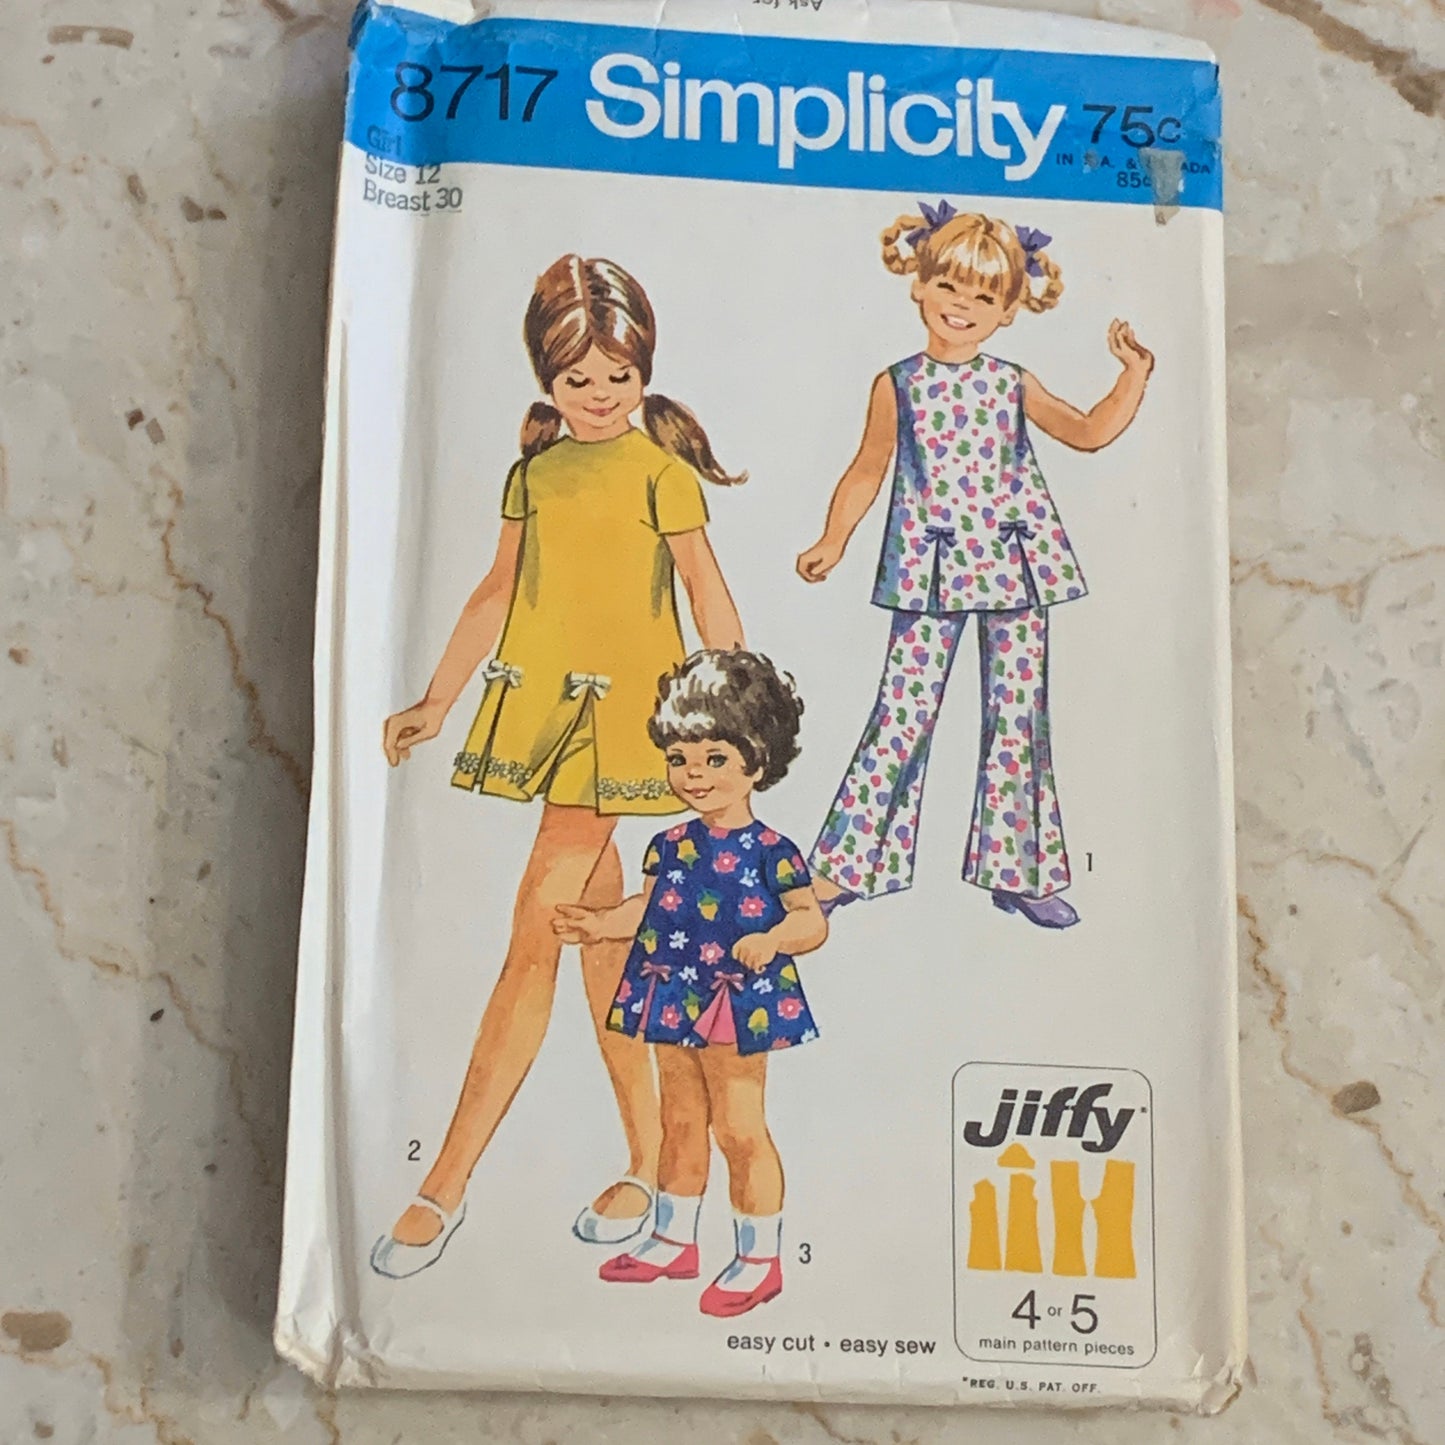 Girl’s Size 12 Play-Dress, Shorts, and Bell Bottom Pants 1970 Vintage Sewing Pattern